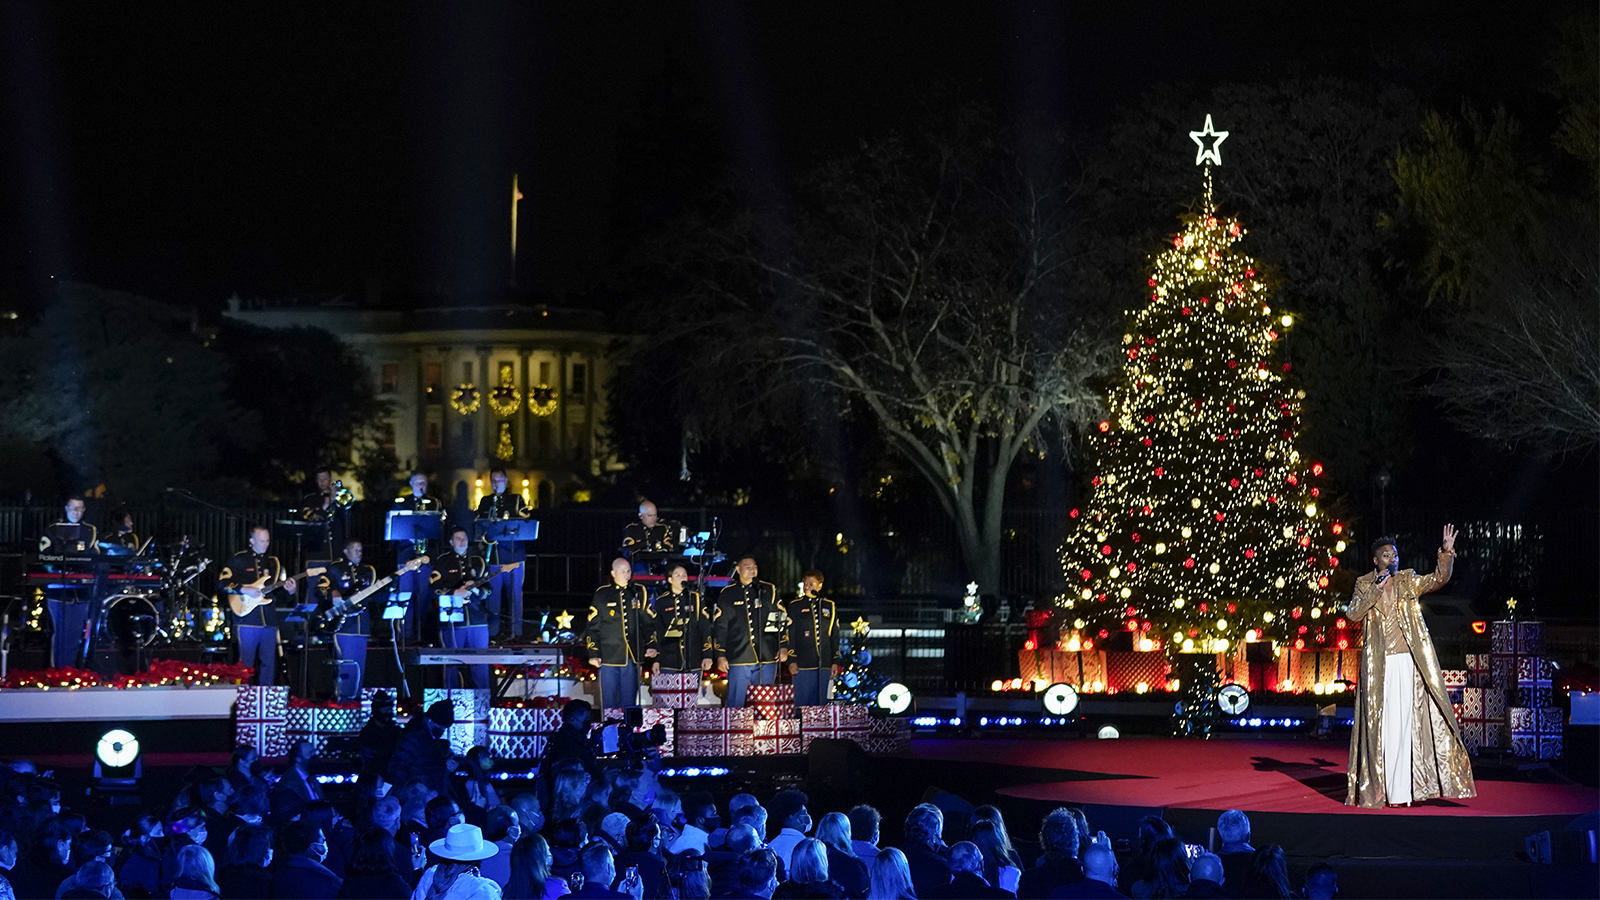 Billy Porter performs as President Joe Biden and first lady Jill Biden attend the National Christmas Tree lighting ceremony at the Ellipse near the White House, Thursday, Dec. 2, 2021, in Washington. (AP Photo/Andrew Harnik)